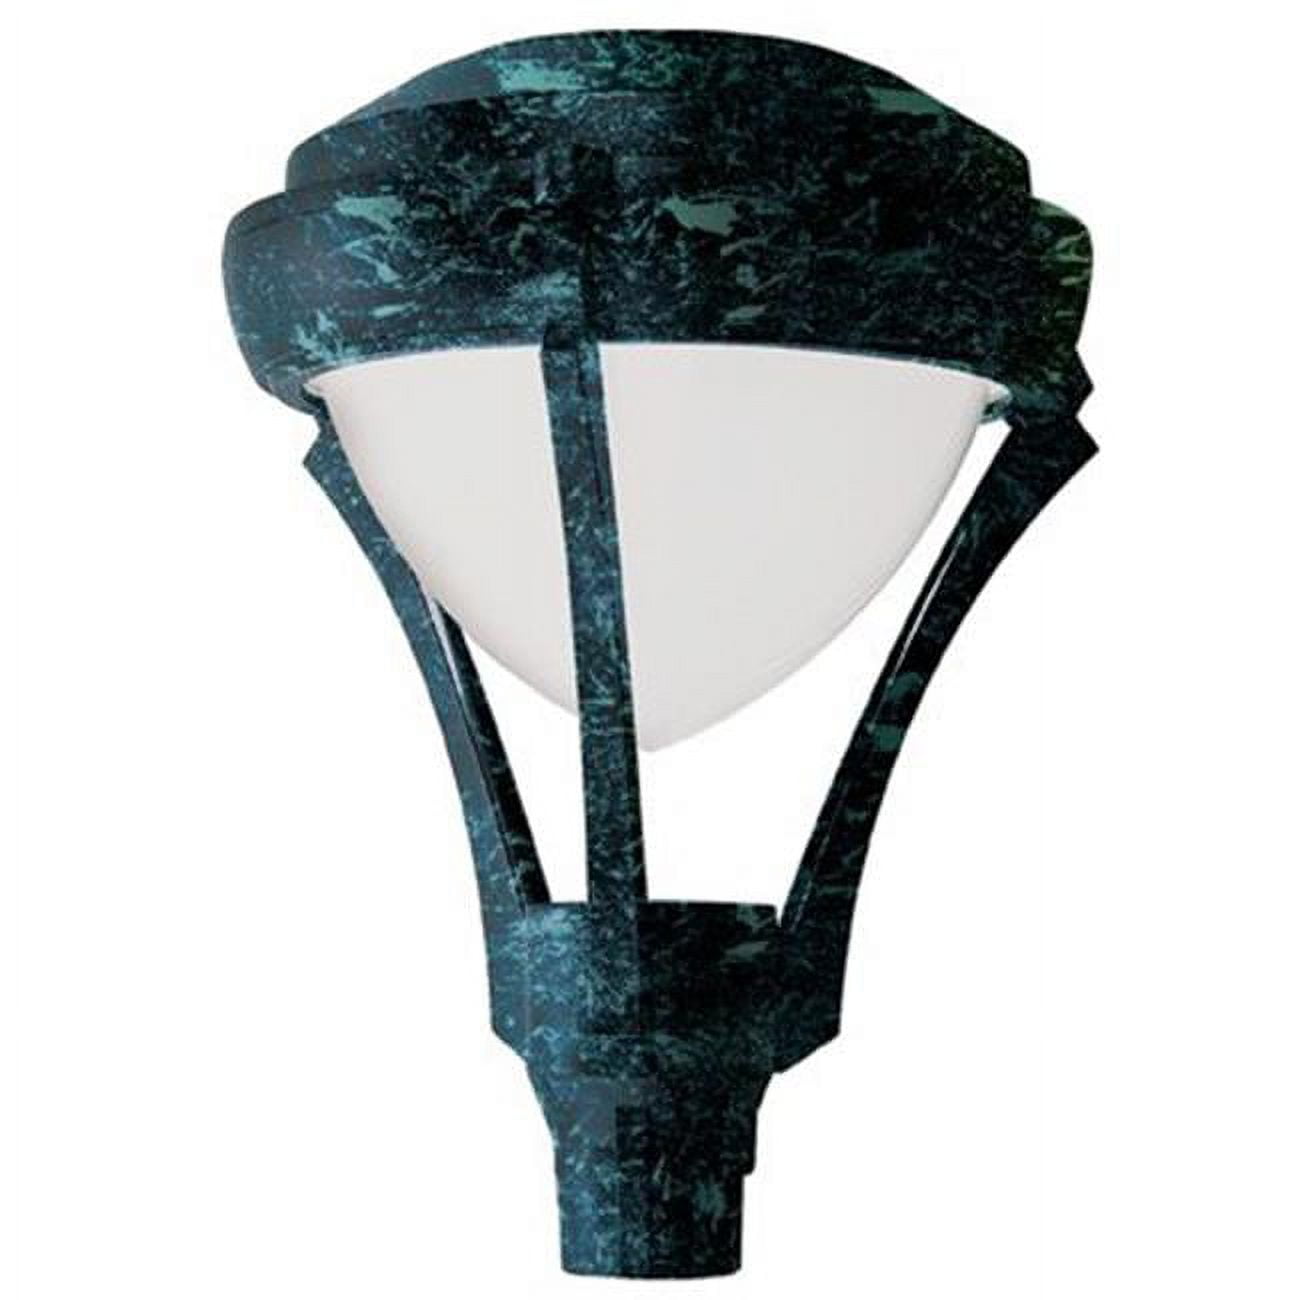 Picture of Dabmar Lighting GM592-VG 70W 120V Powder Coated Cast Aluminum Post Top Light Fixture with High Pressure Sodium Lamp, Verde Green - 27.95 x 21.65 x 21.65 in.